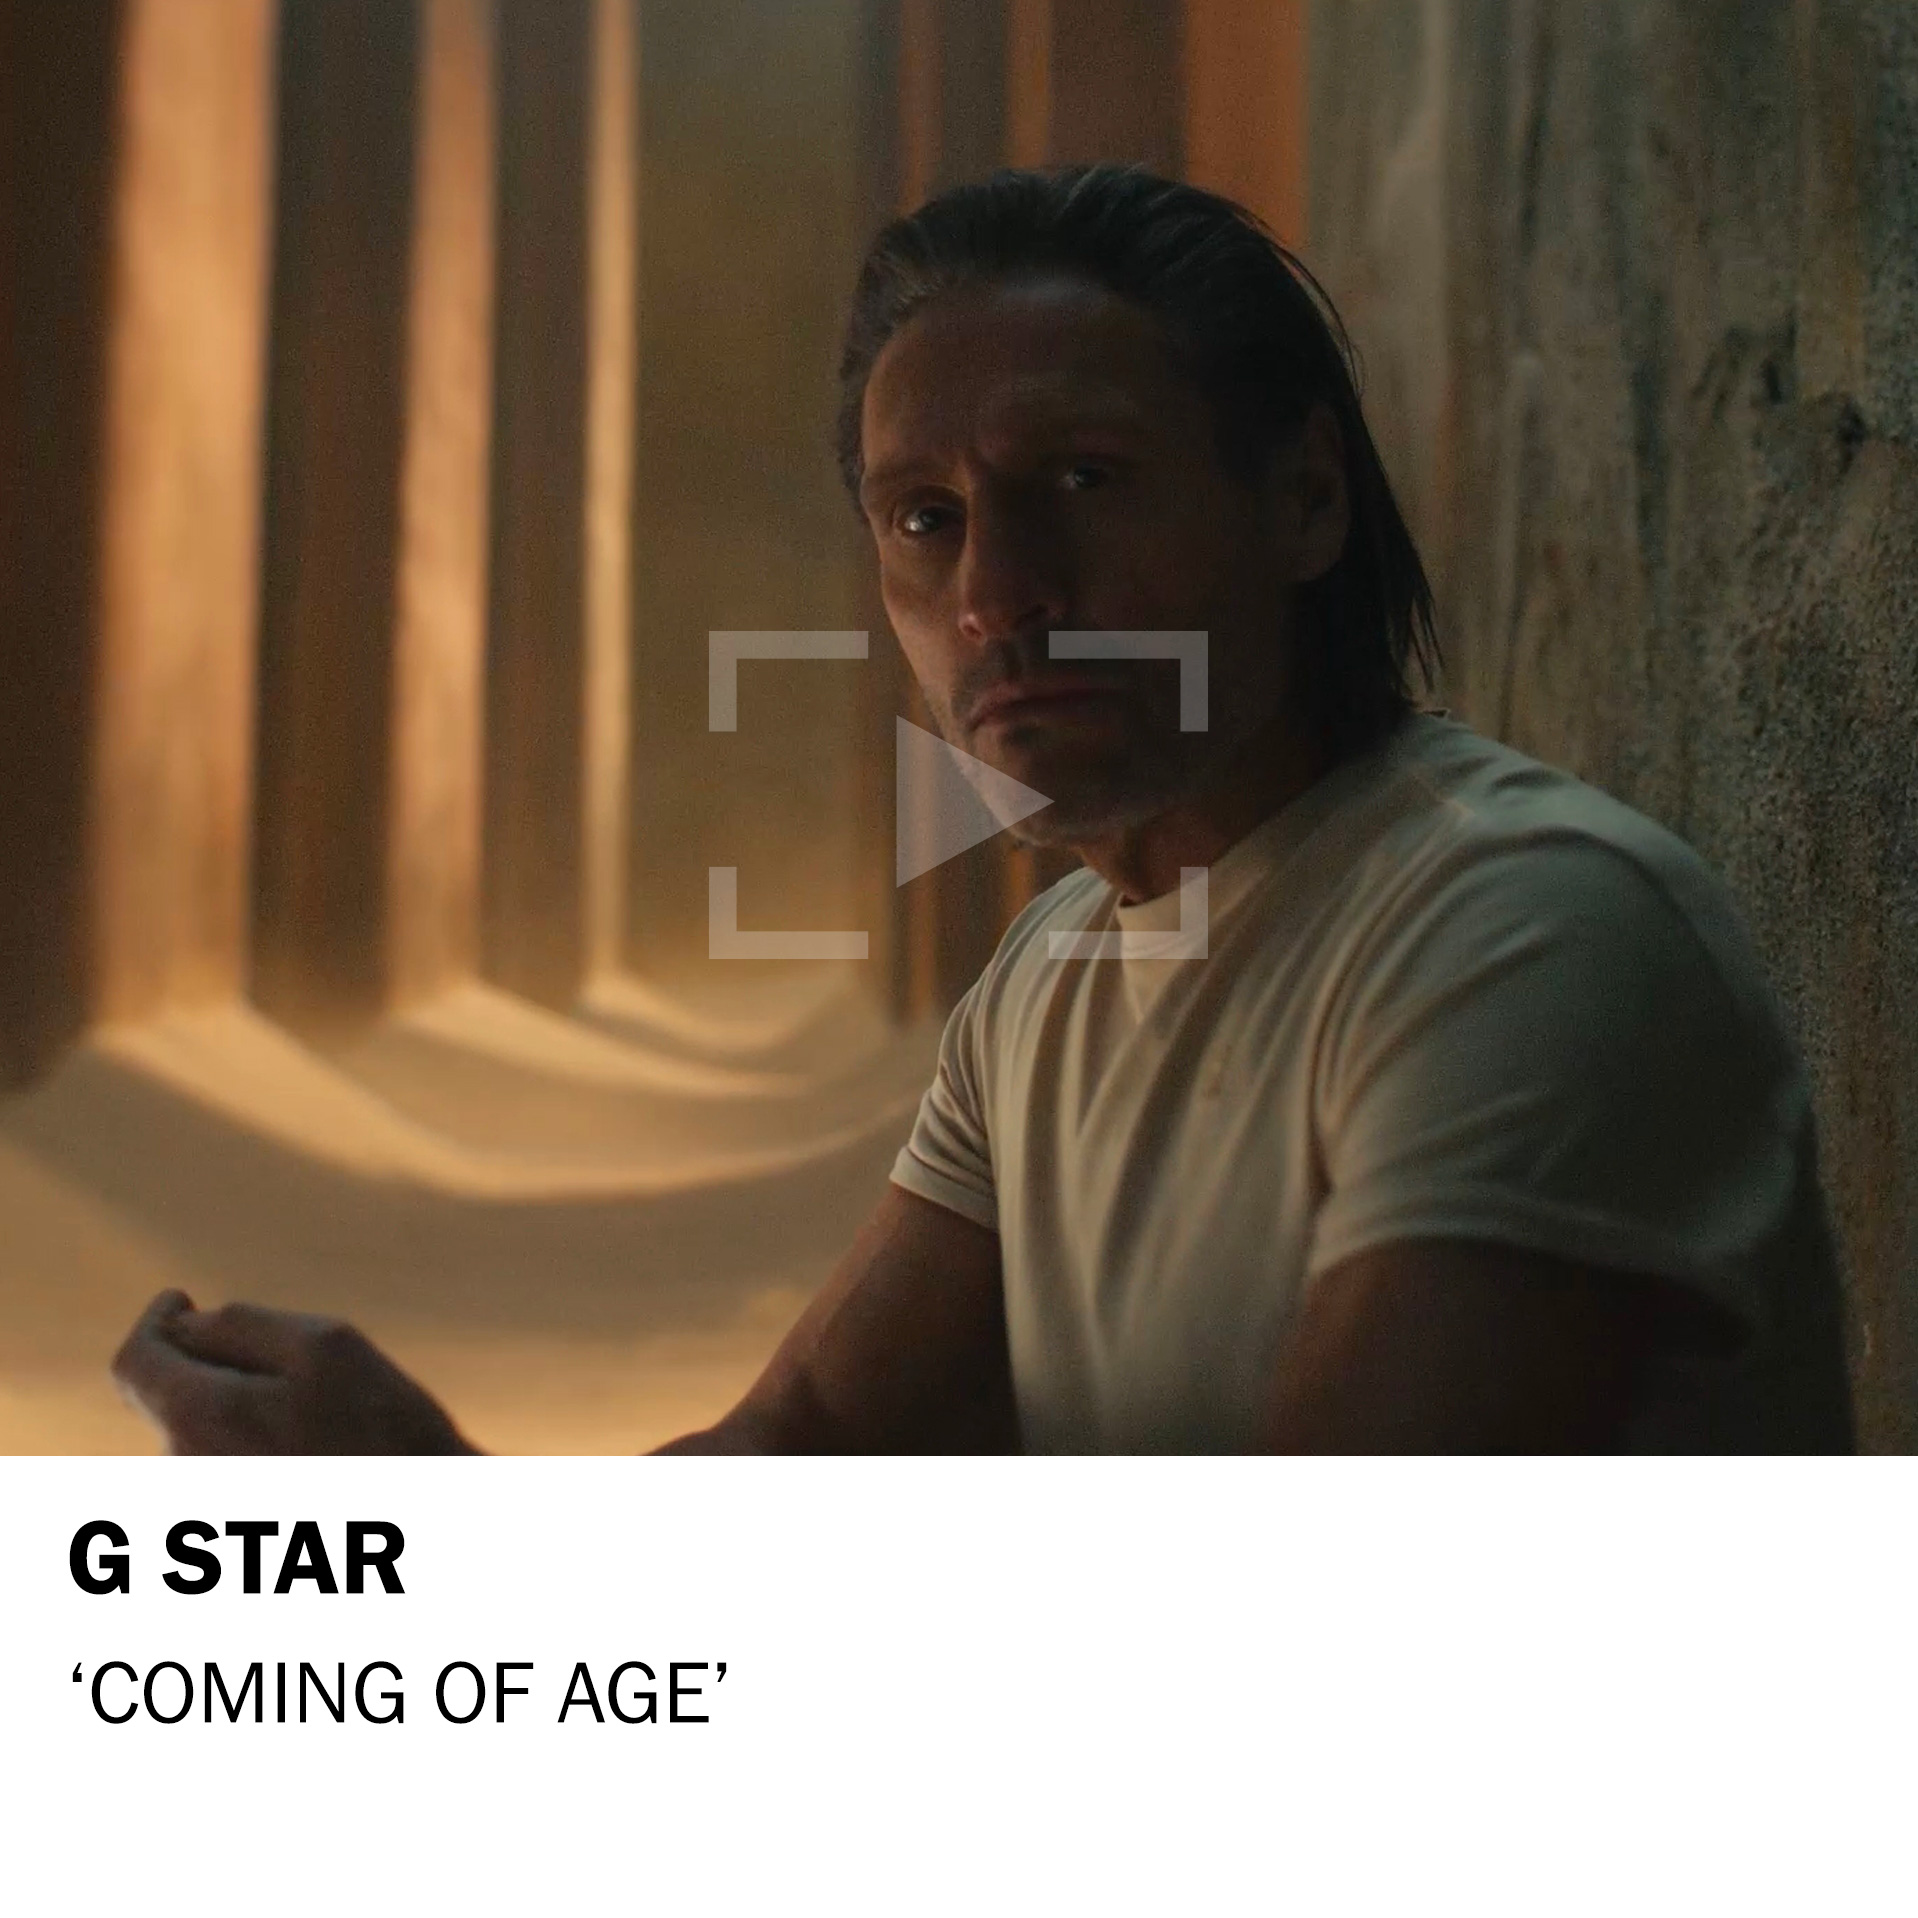 G-Star – Coming of age